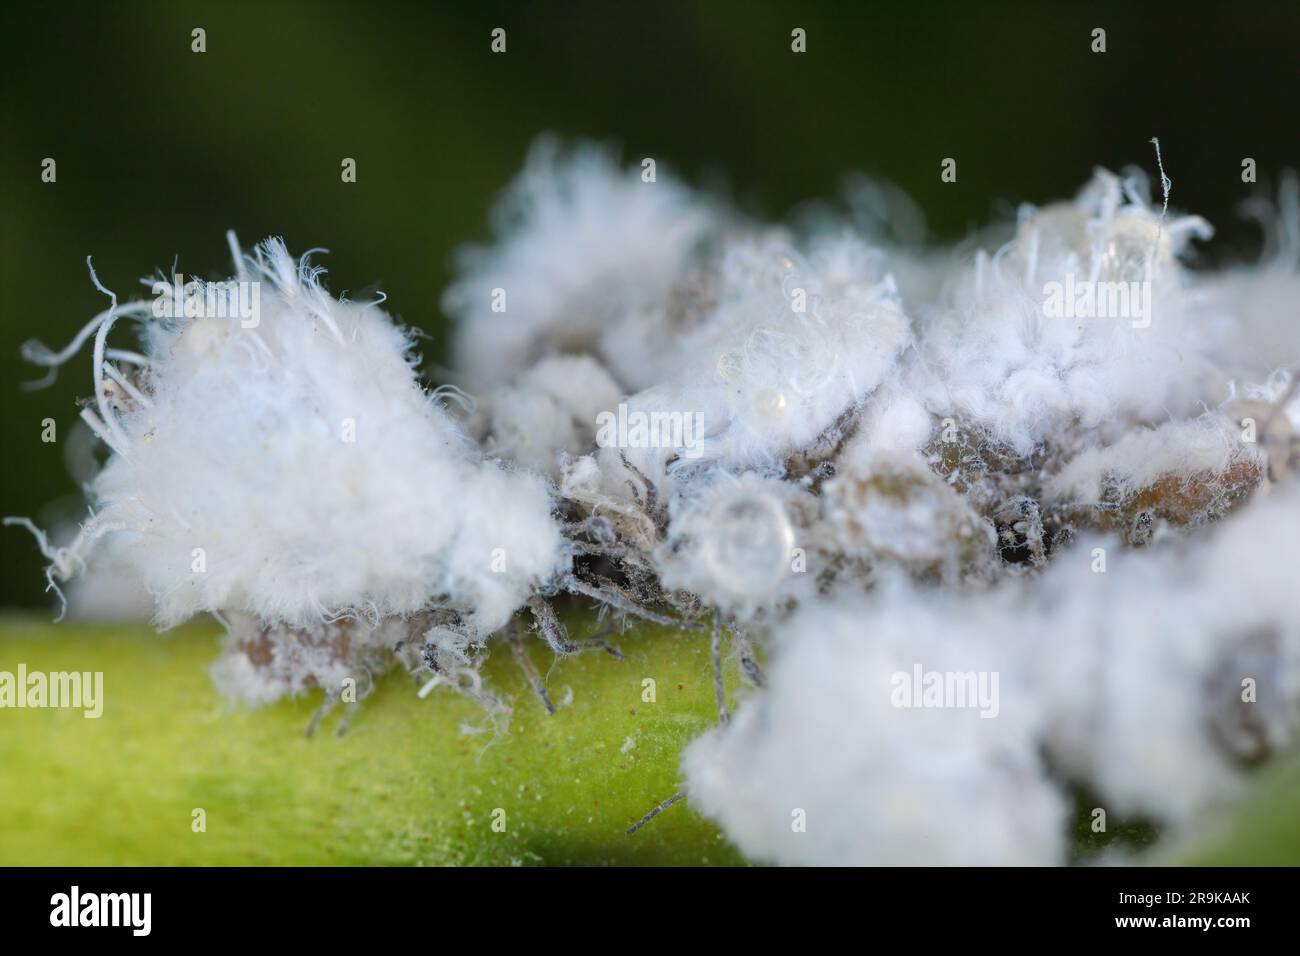 Prociphilus bumeliae. A colony of hairy, wax-covered aphid secretions on an ash tree. Stock Photo